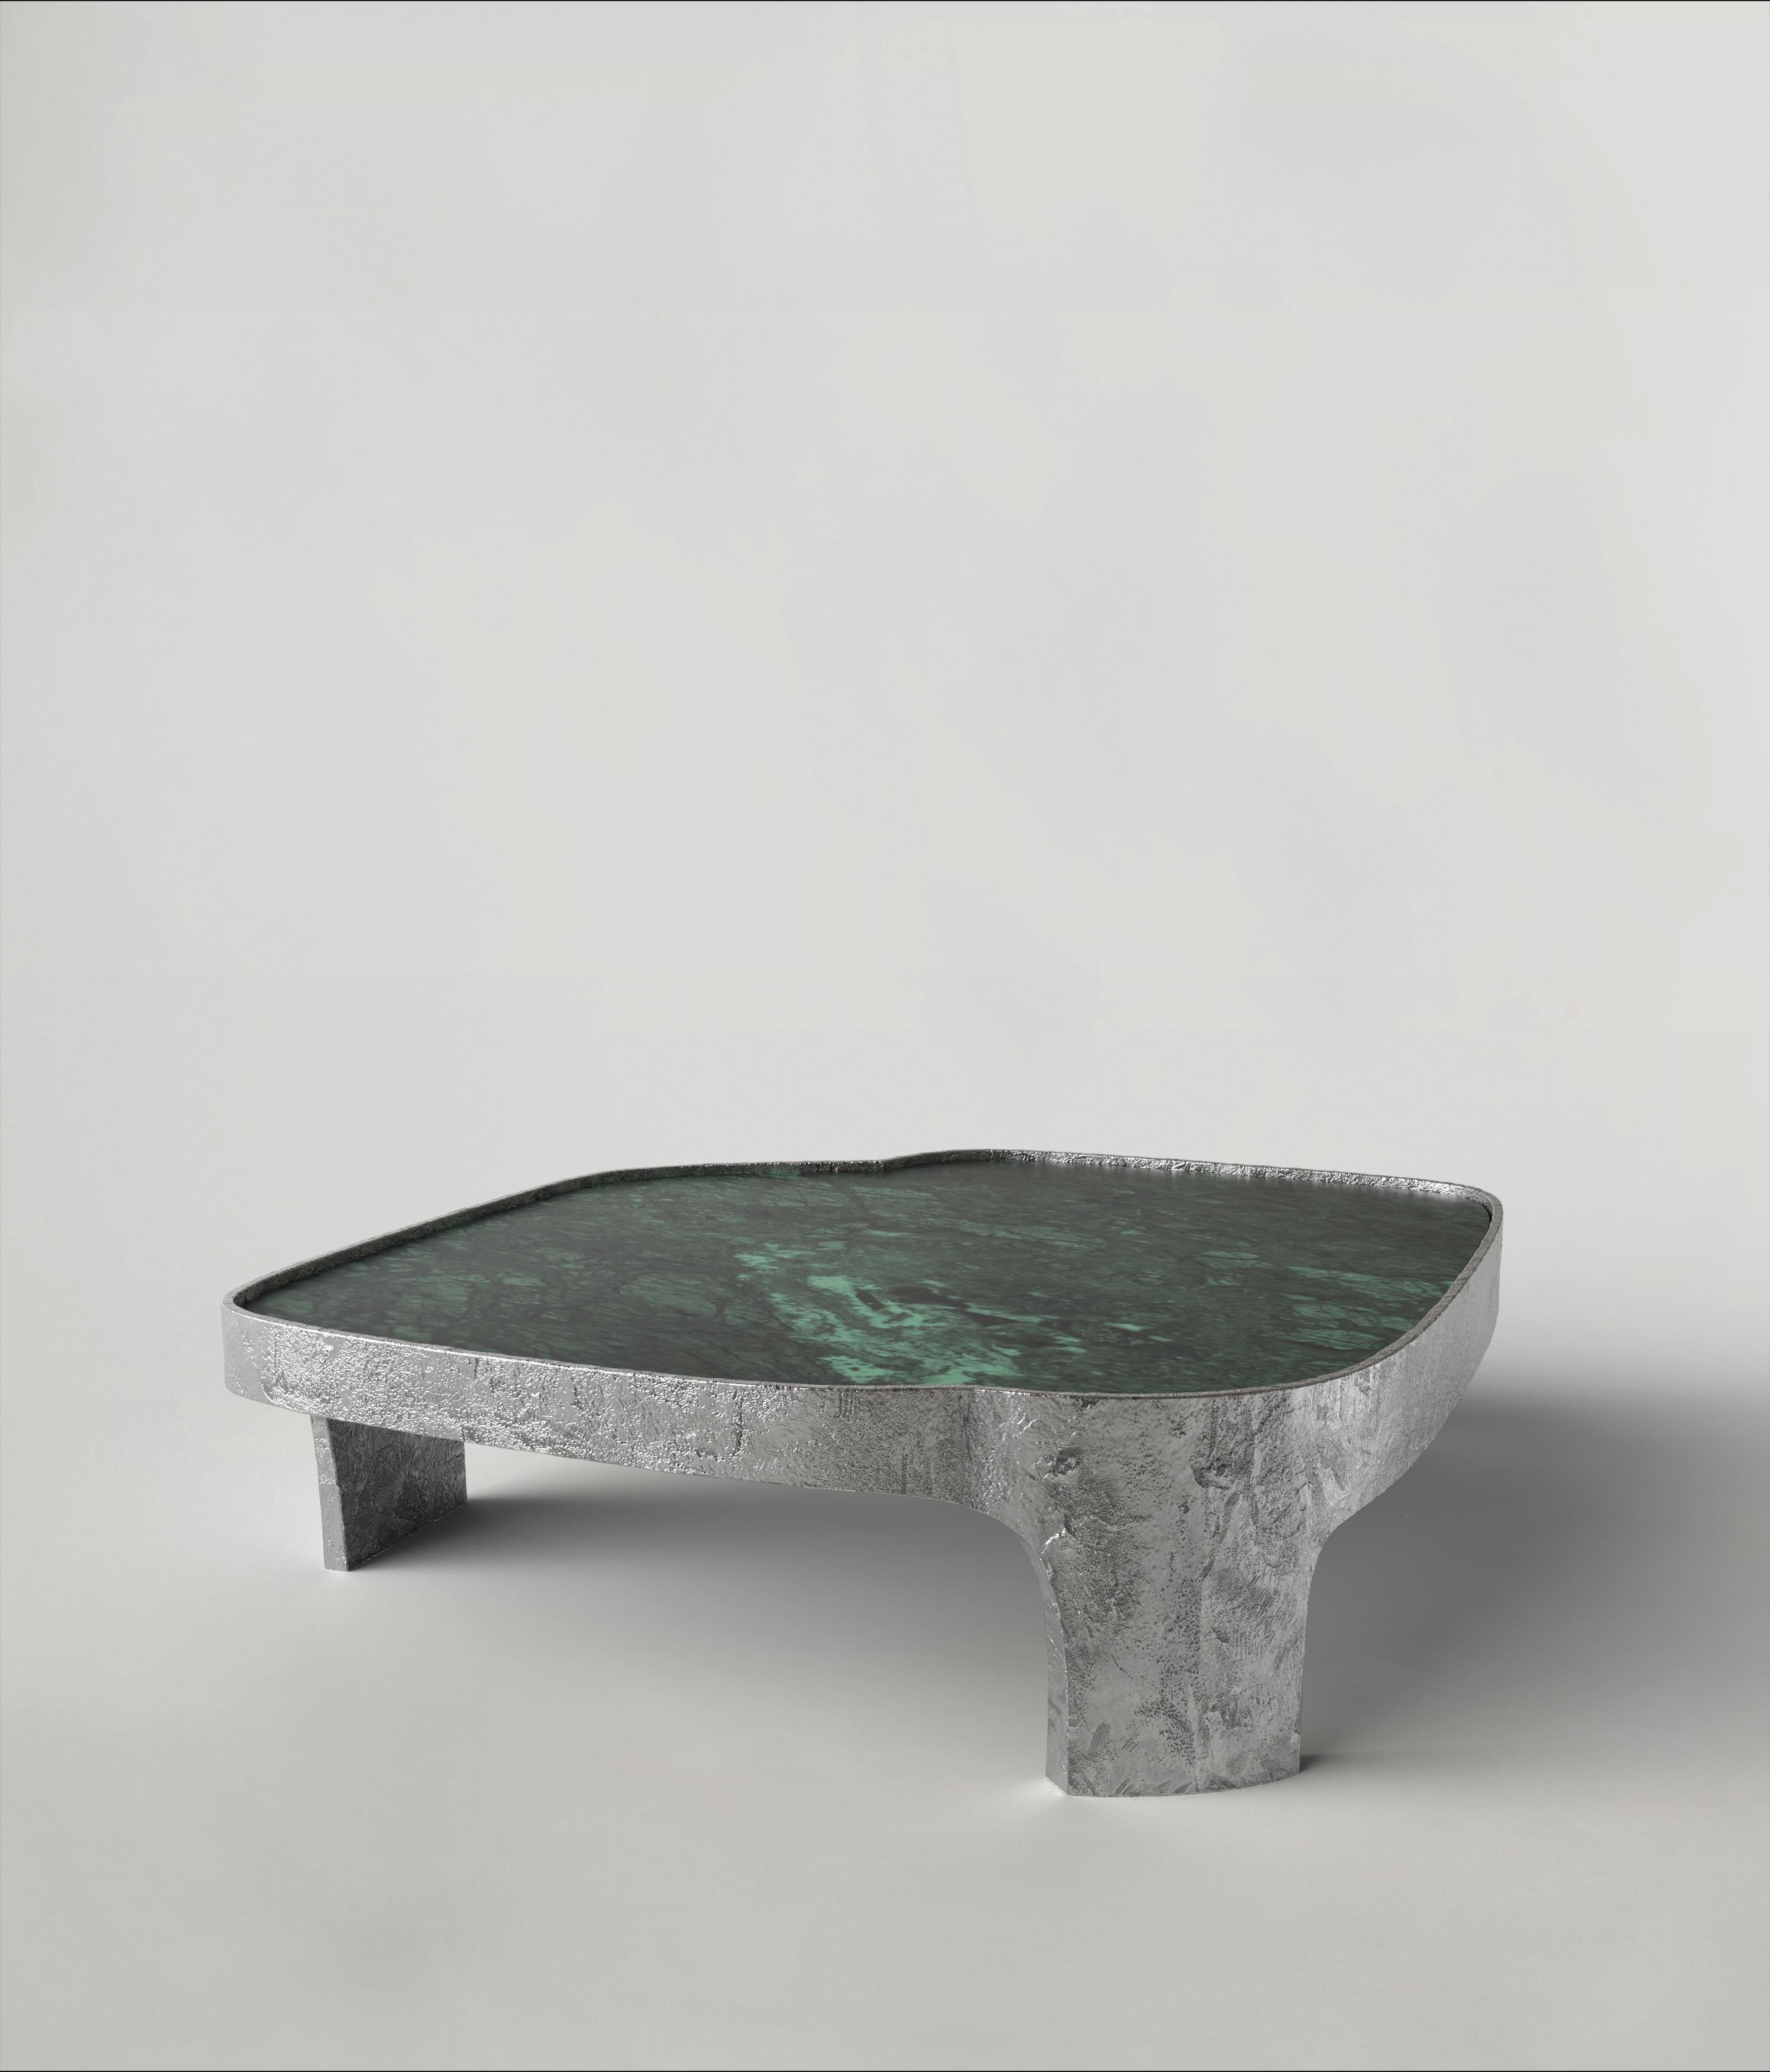 Sumatra V2 low table by Edizione Limitata
Limited Edition of 15 + 3 pieces. Signed and numbered.
Dimensions: D100 x W100 x H30 cm
Materials: Aluminum + Verde Guatemale Marble

Sumatra is a 21st Century collection of tables made by Italian artisans